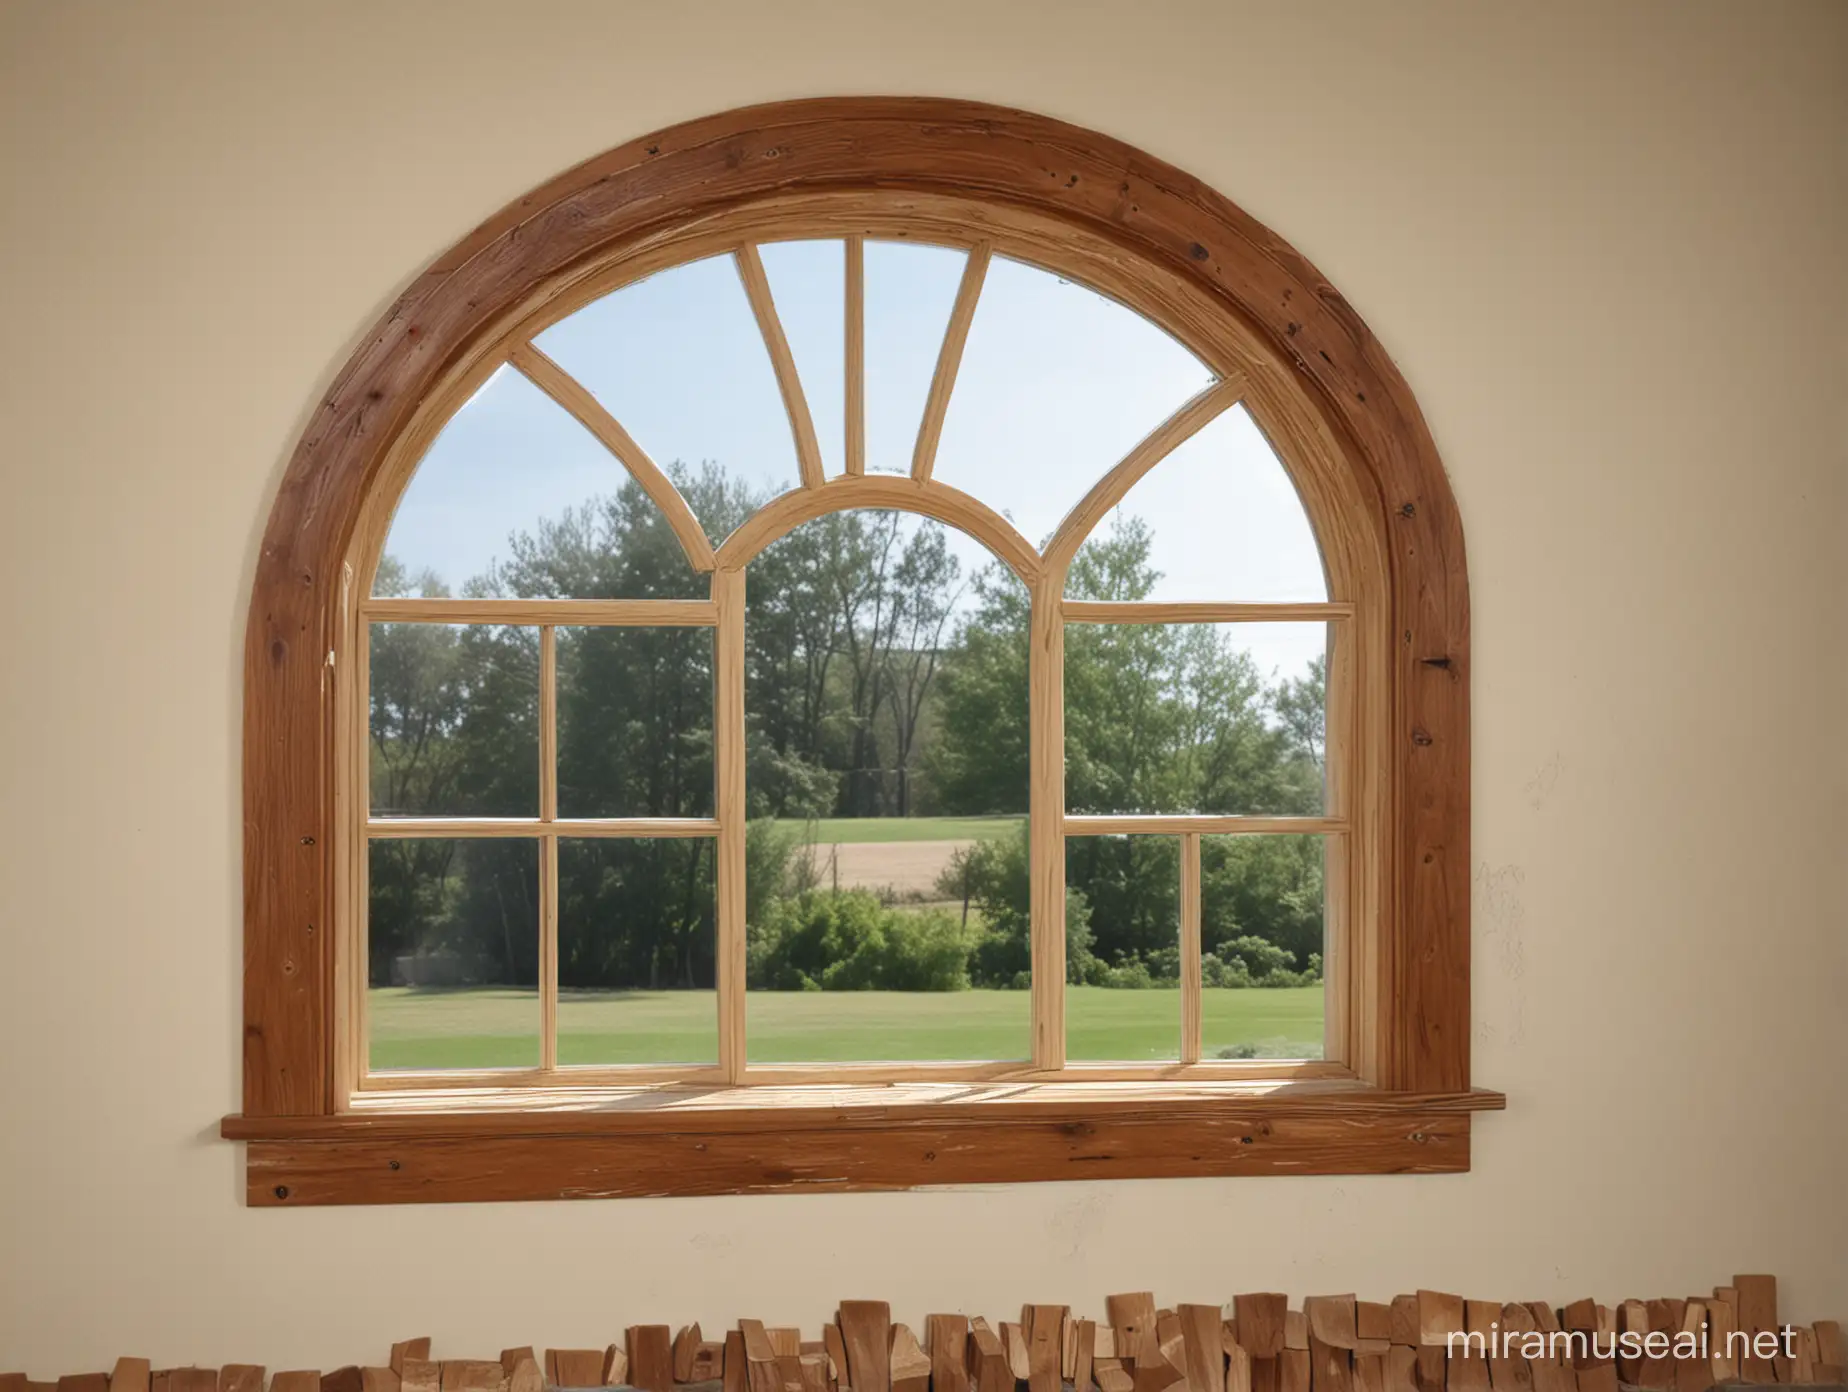 modern style window with an arched top made of wood but distressed